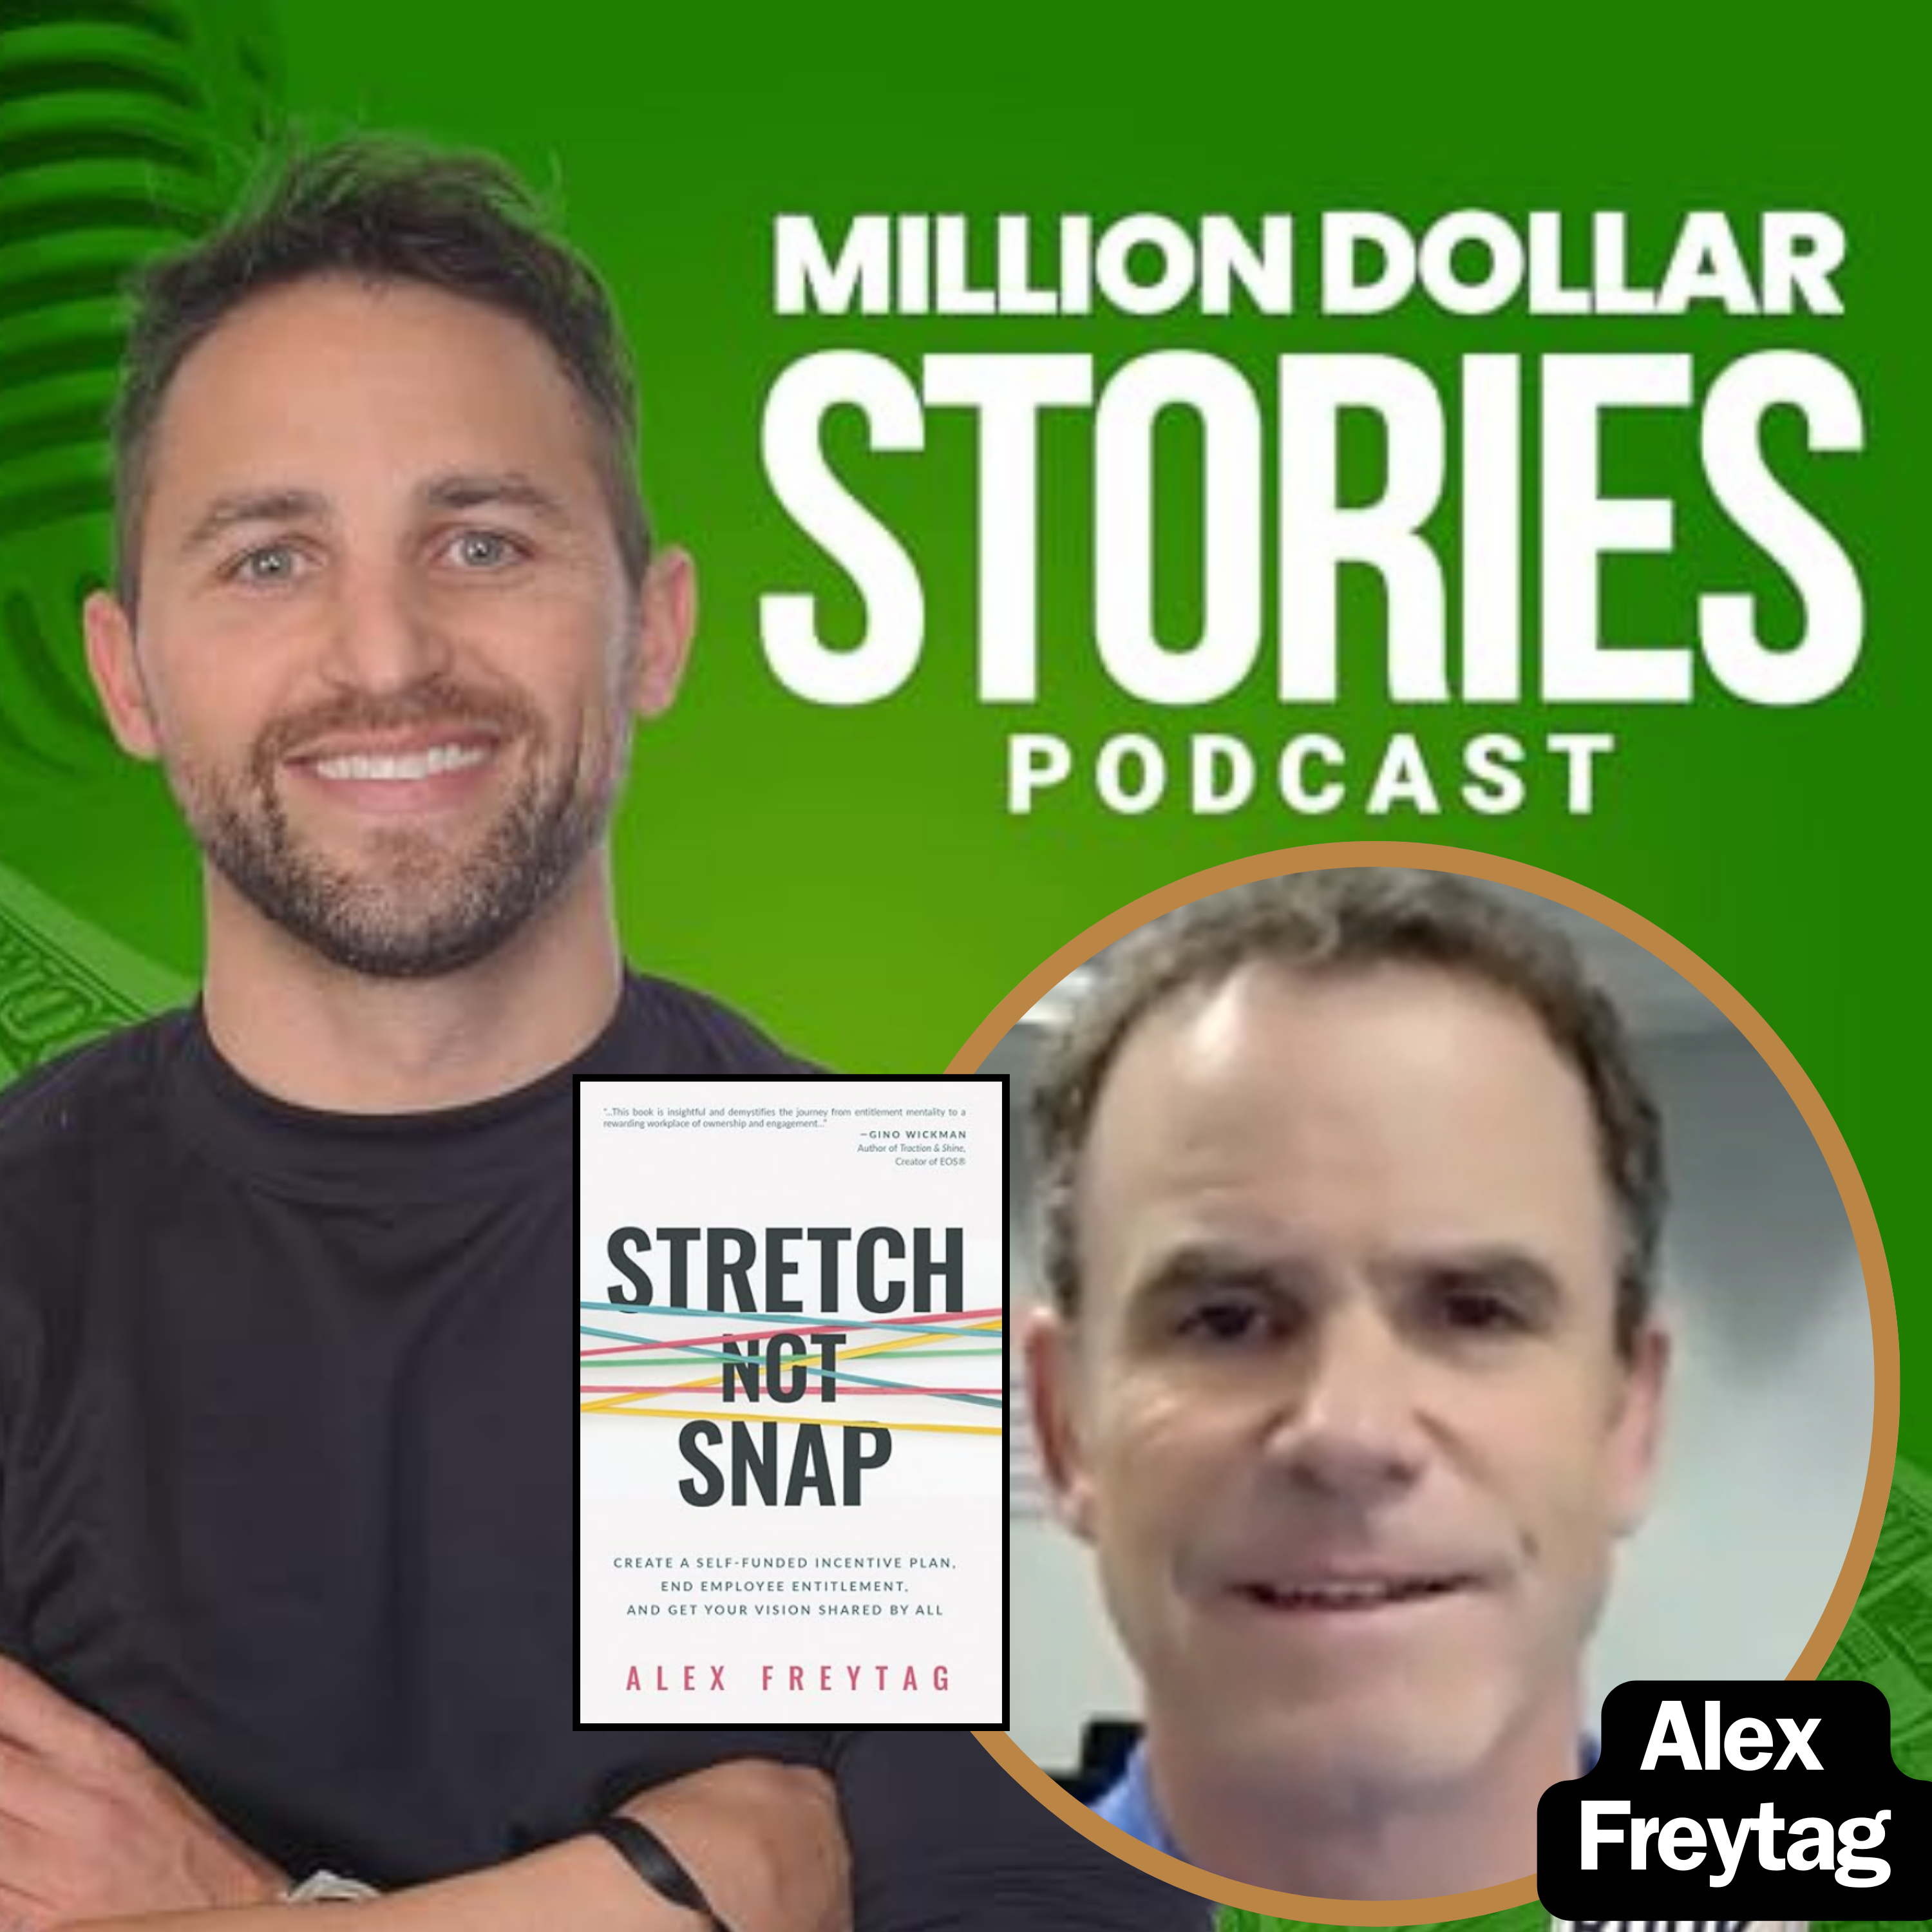 Alex Freytag – Author of “Stretch Not Snap: Create a Self-Funded Incentive Plan, End Employee Entitlement, and Get Your Vision Shared by All”